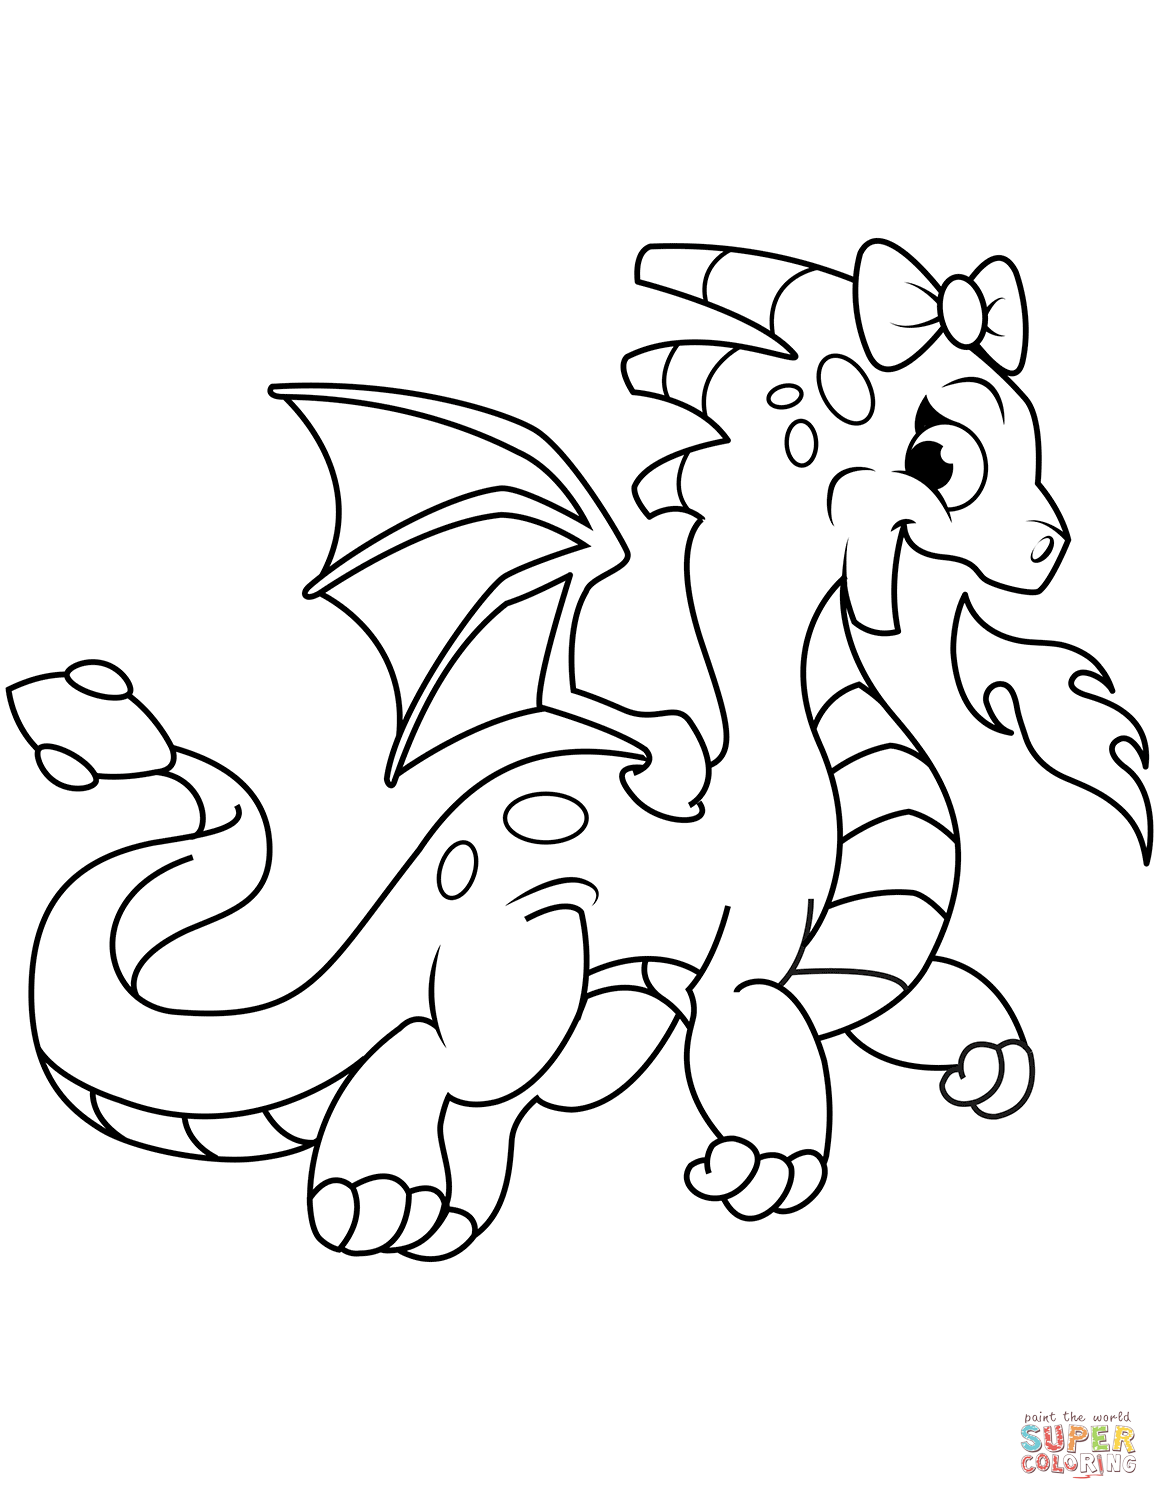 Cute dragon breathing fire coloring page free printable coloring pages